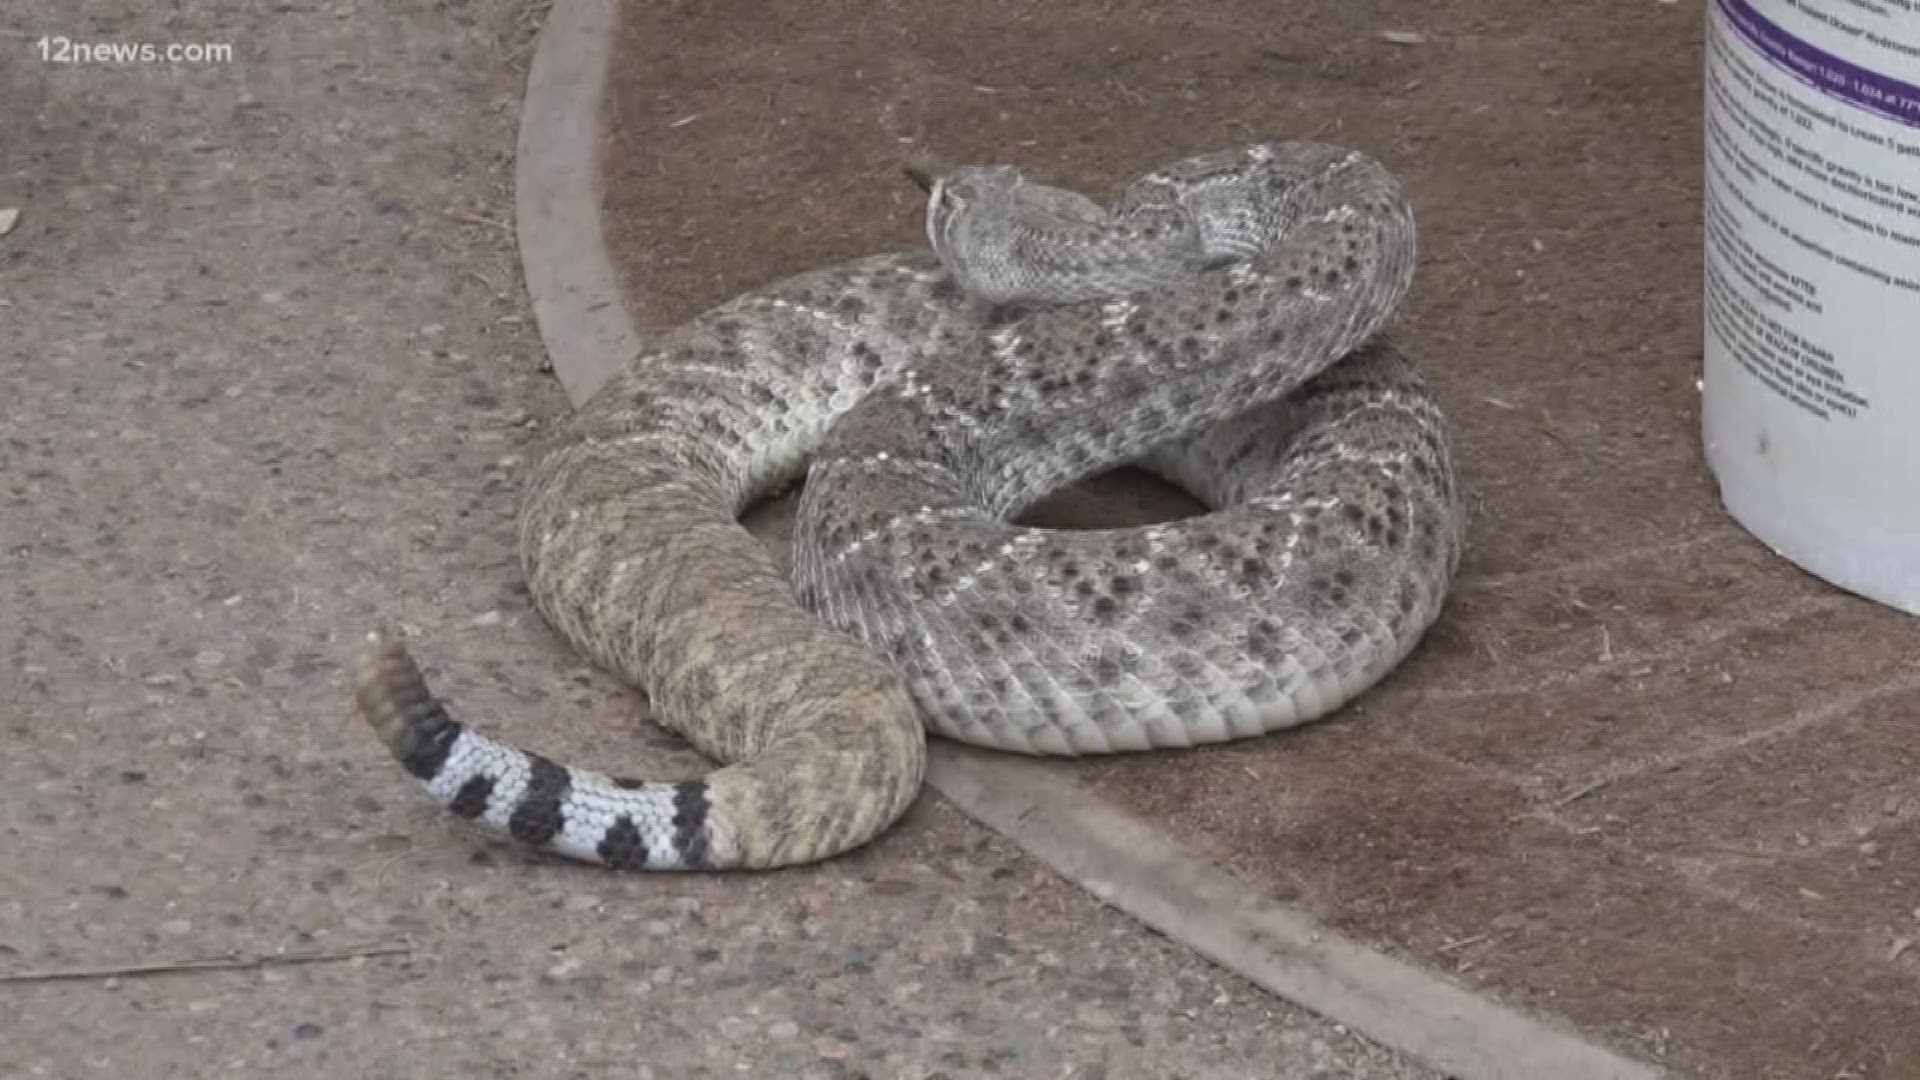 We asked an expert what you should do while you wait for first responders if a rattlesnake bites you.